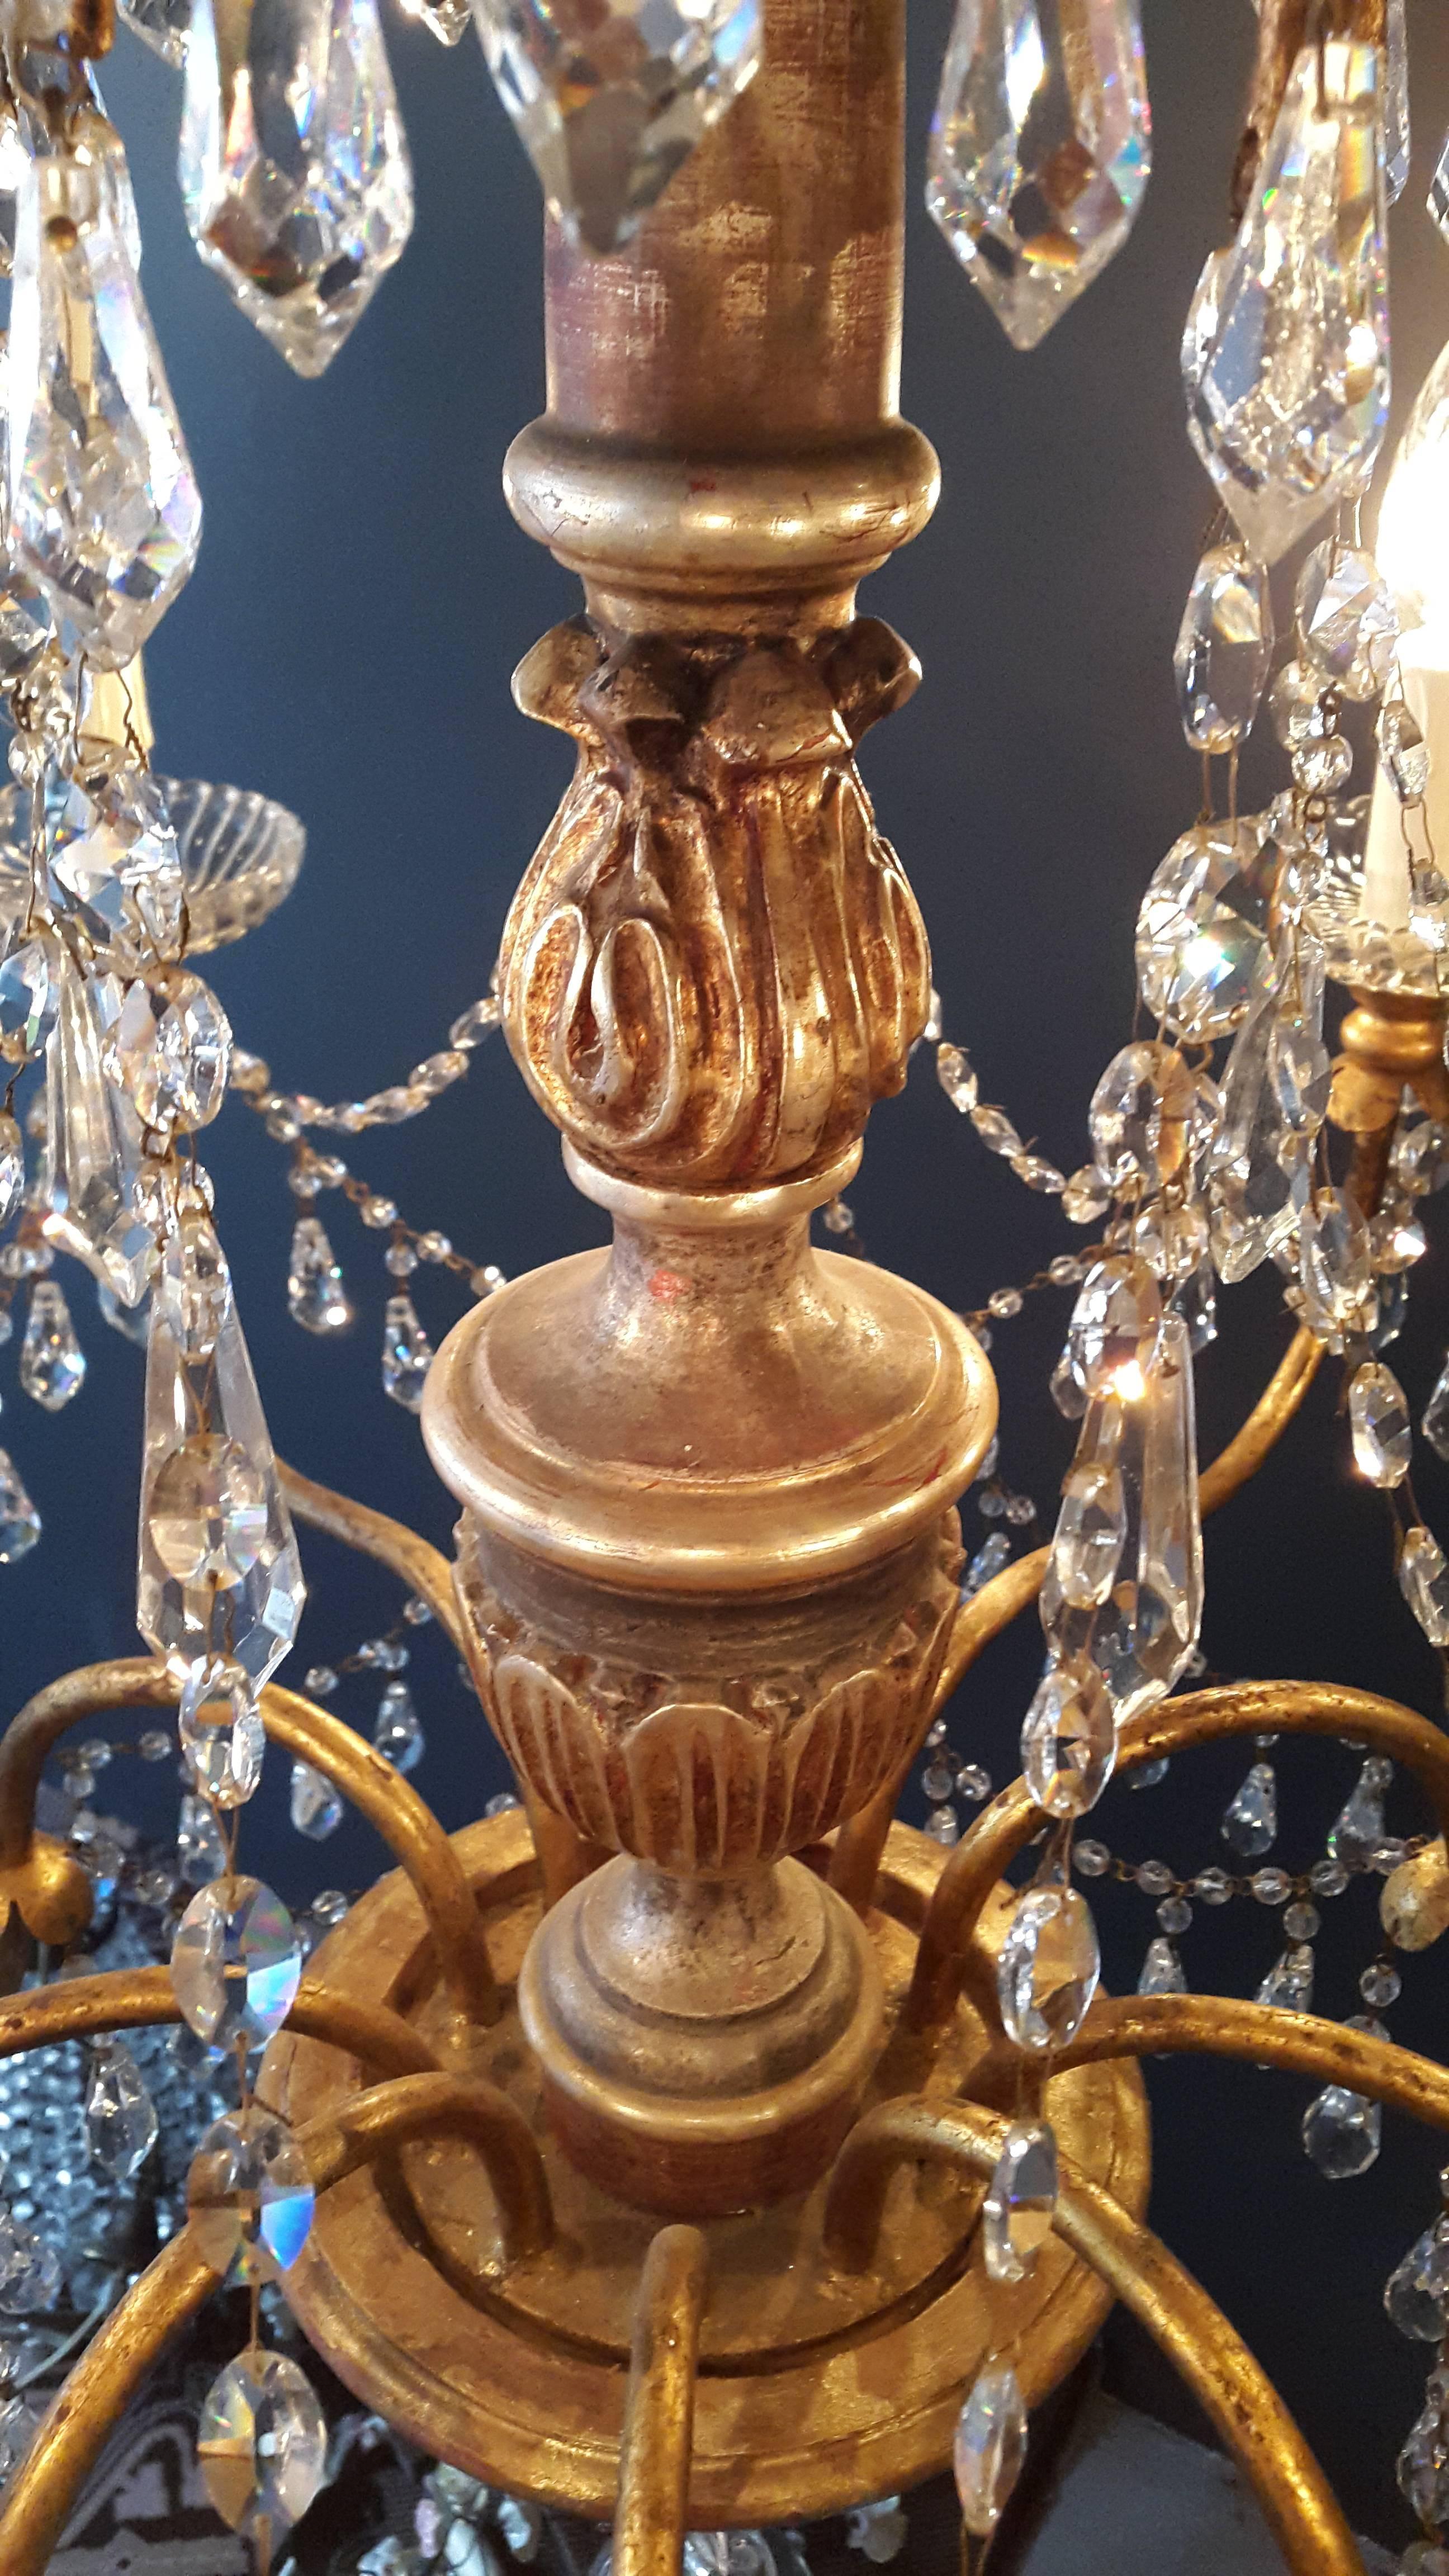 Original preserved chandelier, circa 1900. Cabling and sockets completely renewed. Crystal hand-knotted
Measure: Total height 120cm, height without chain 90cm, diameter 70cm, weight (approximately) 10kg

Number of lights: Ten Light bulb sockets: